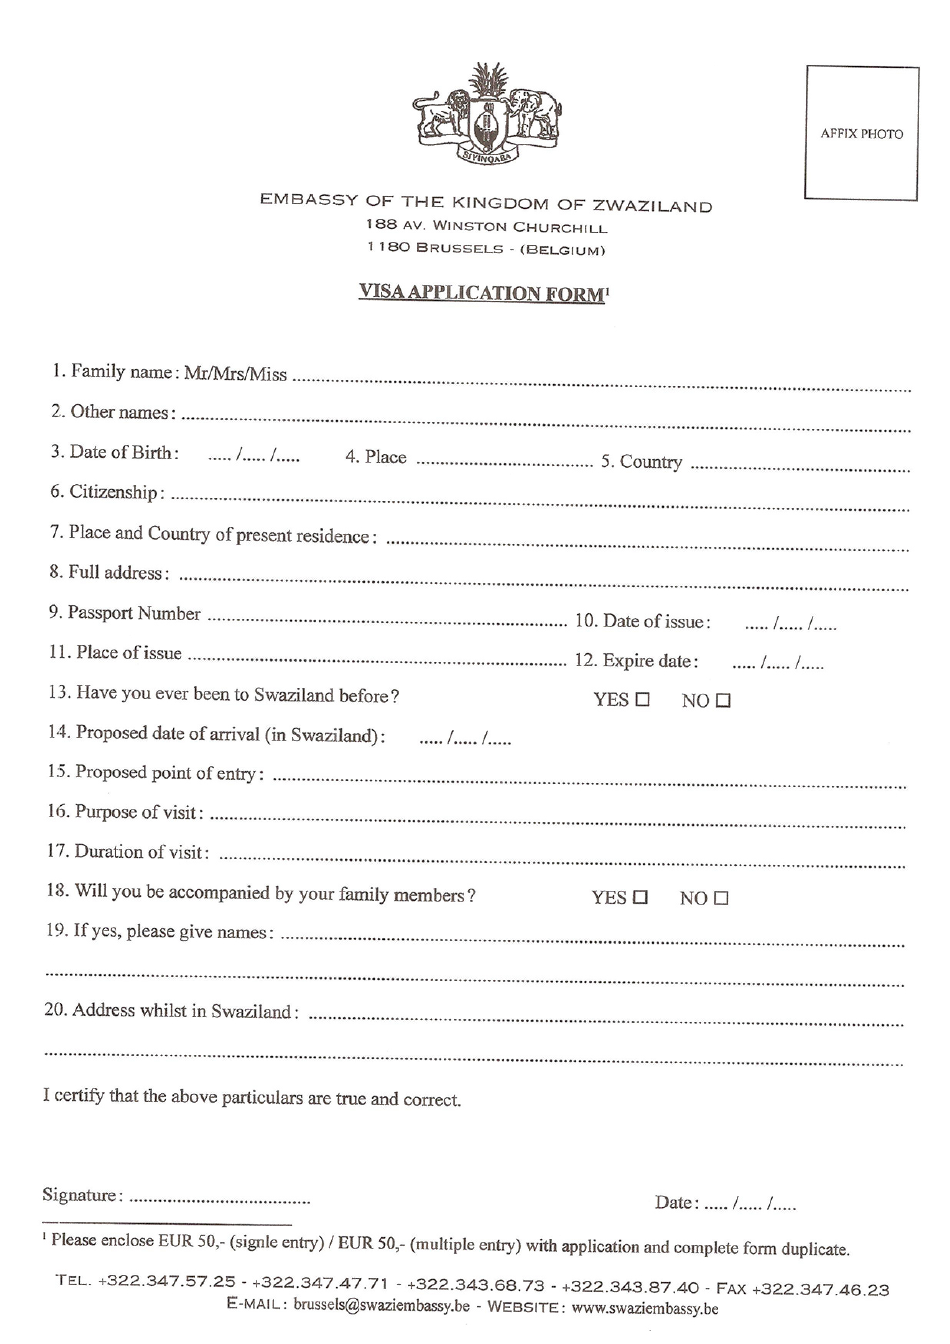 Swaziland Visa Application Form - Embassy of the Kingdom of Zwaziland - City of Brussels, Brussels-Capital Region, Belgium, Page 1